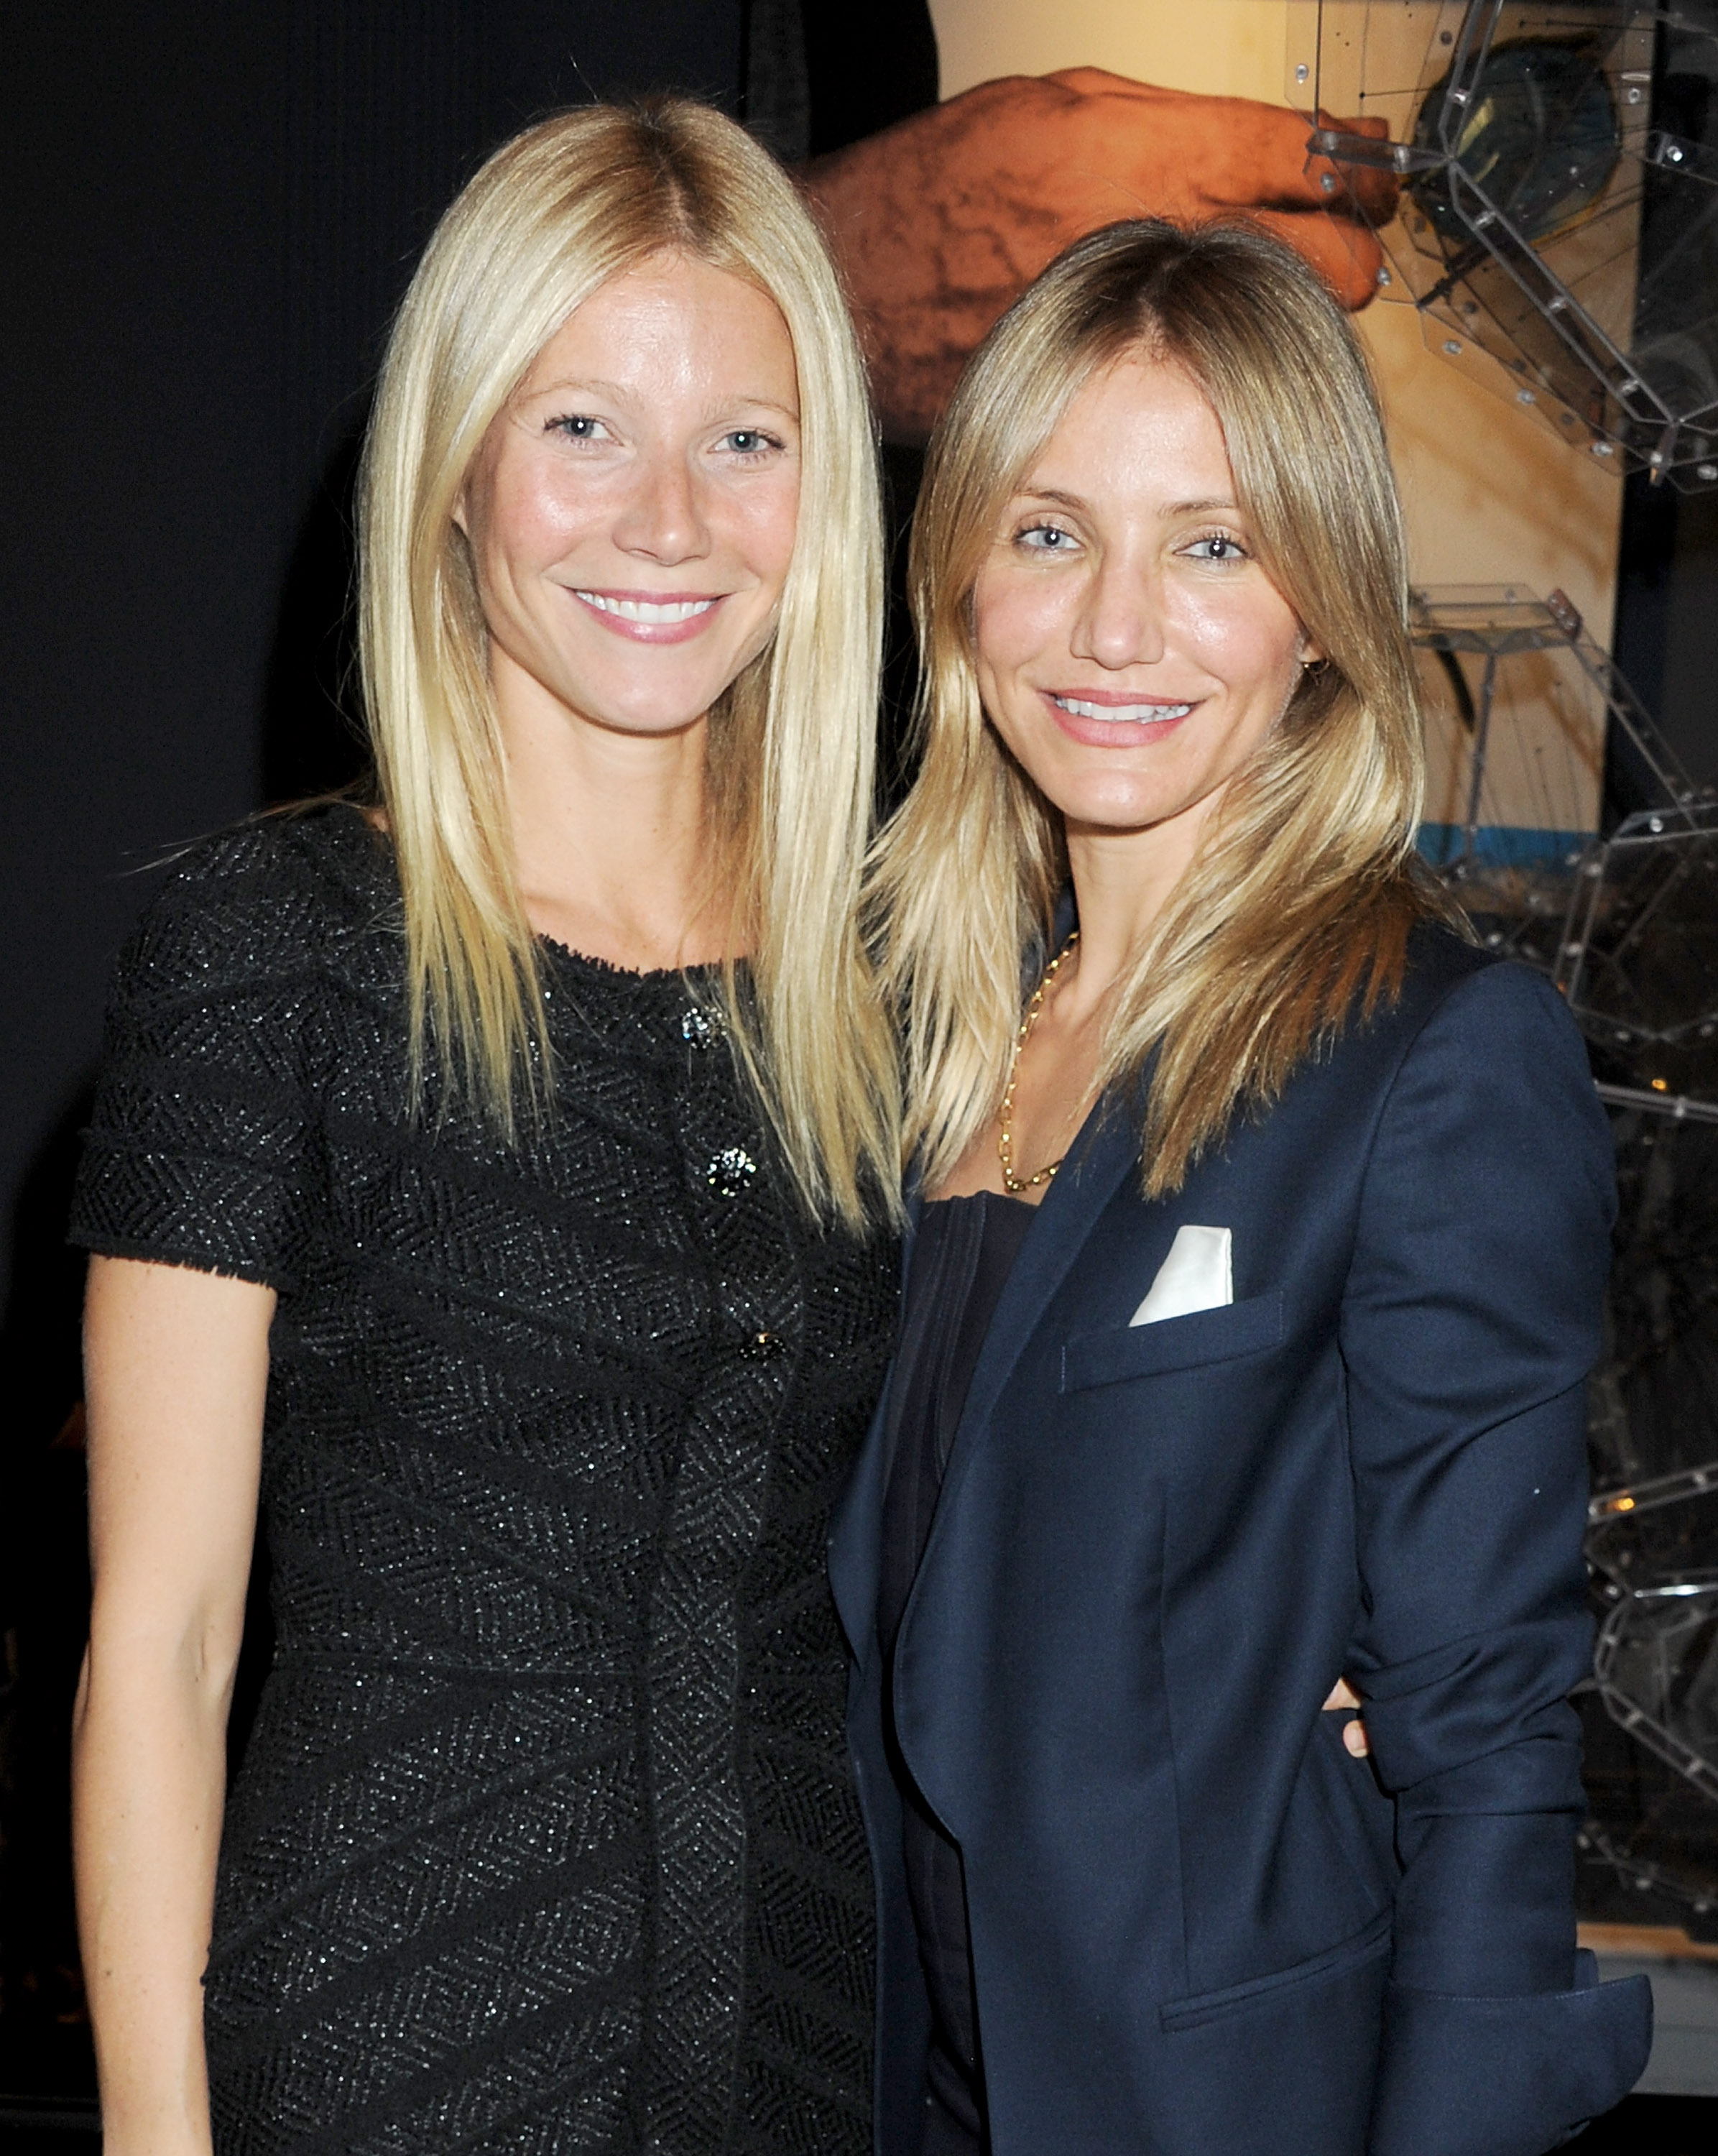 Gwyneth Paltrow (L) and Cameron Diaz in London, England on October 5, 2011 | Source: Getty Images